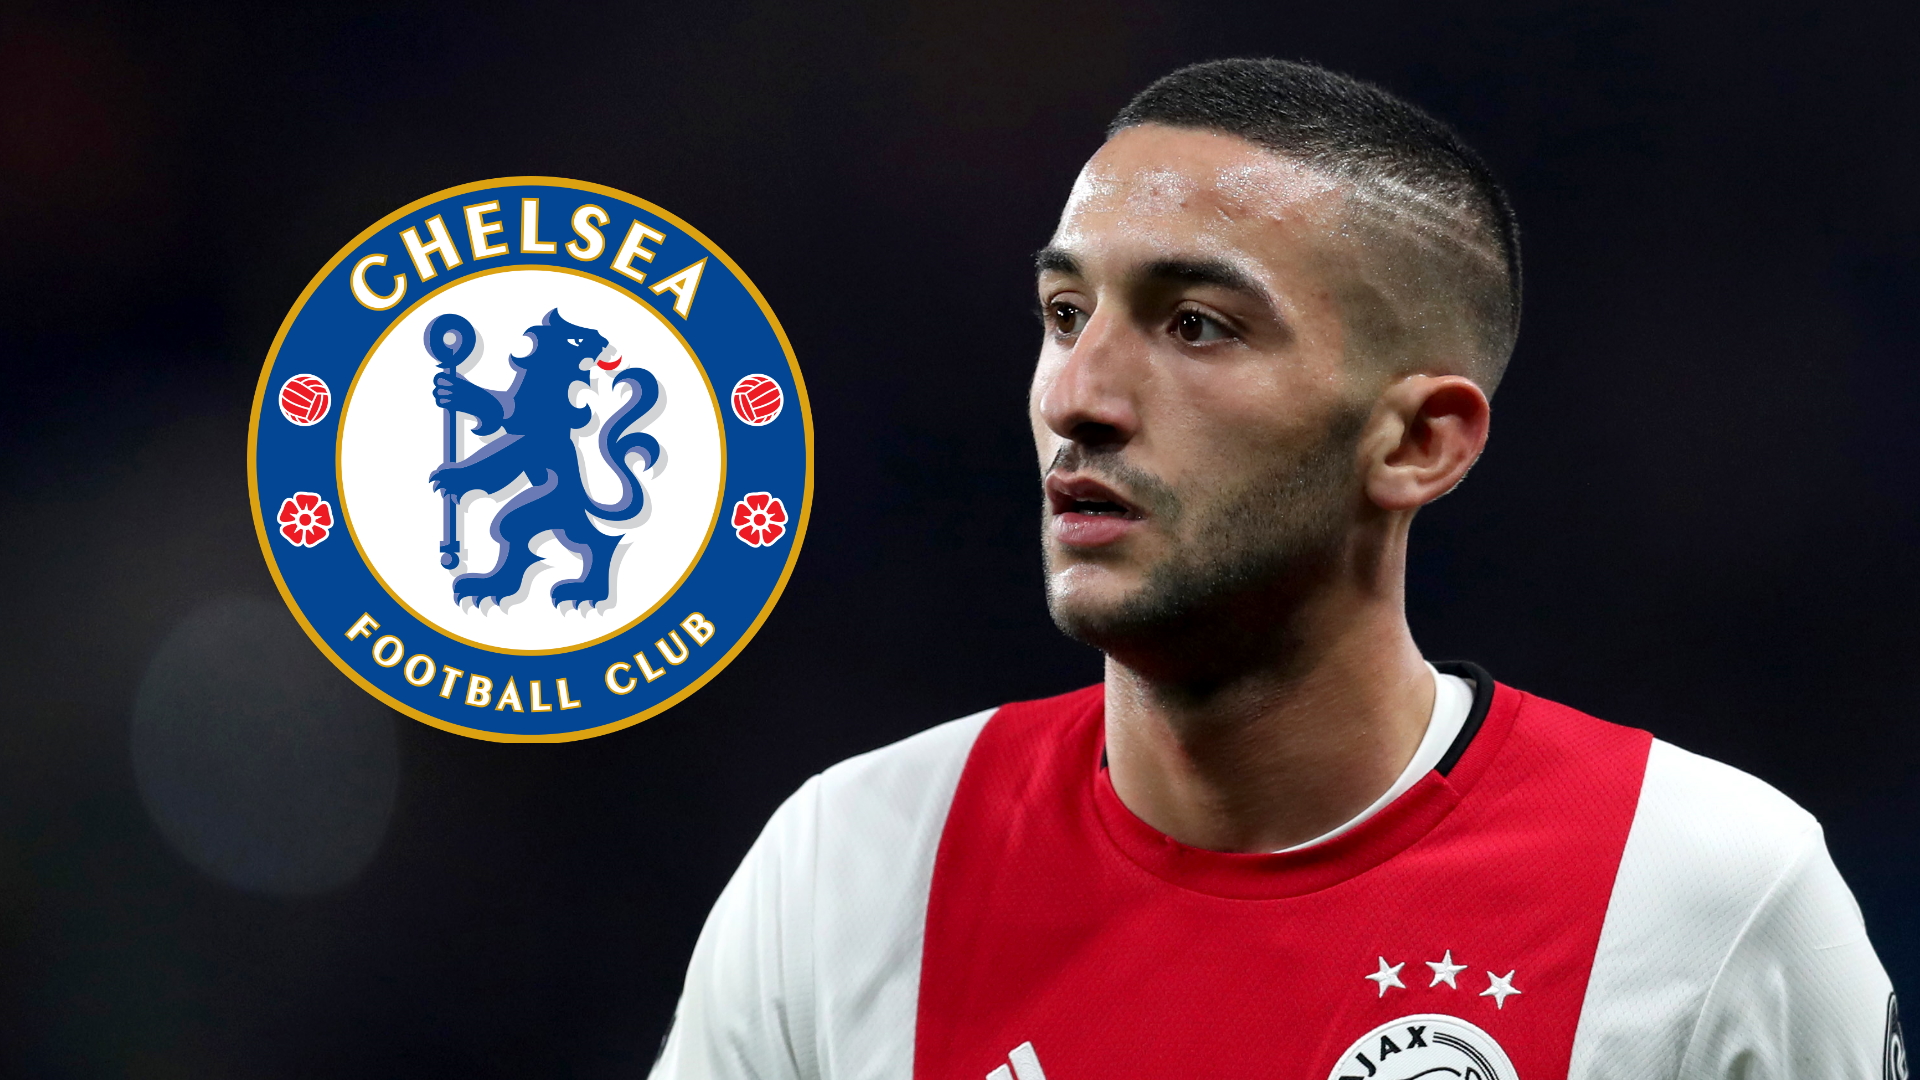 'On July 1, I'll be a Chelsea player' - Ziyech prepped for Stamford Bridge move despite uncertainty